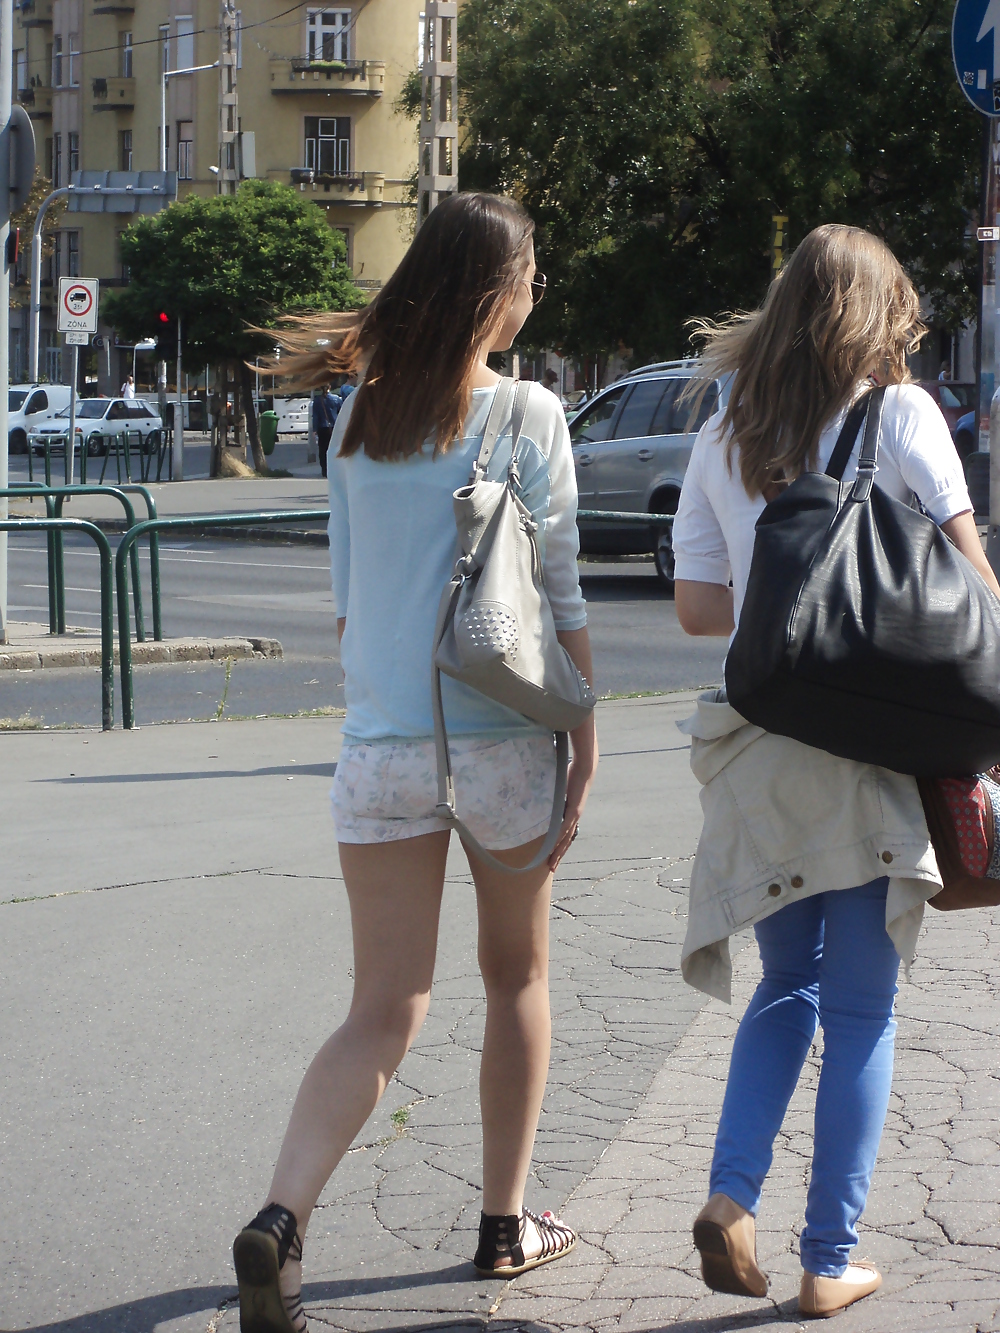 Two tight Teens dressed slutty Candids #19686560